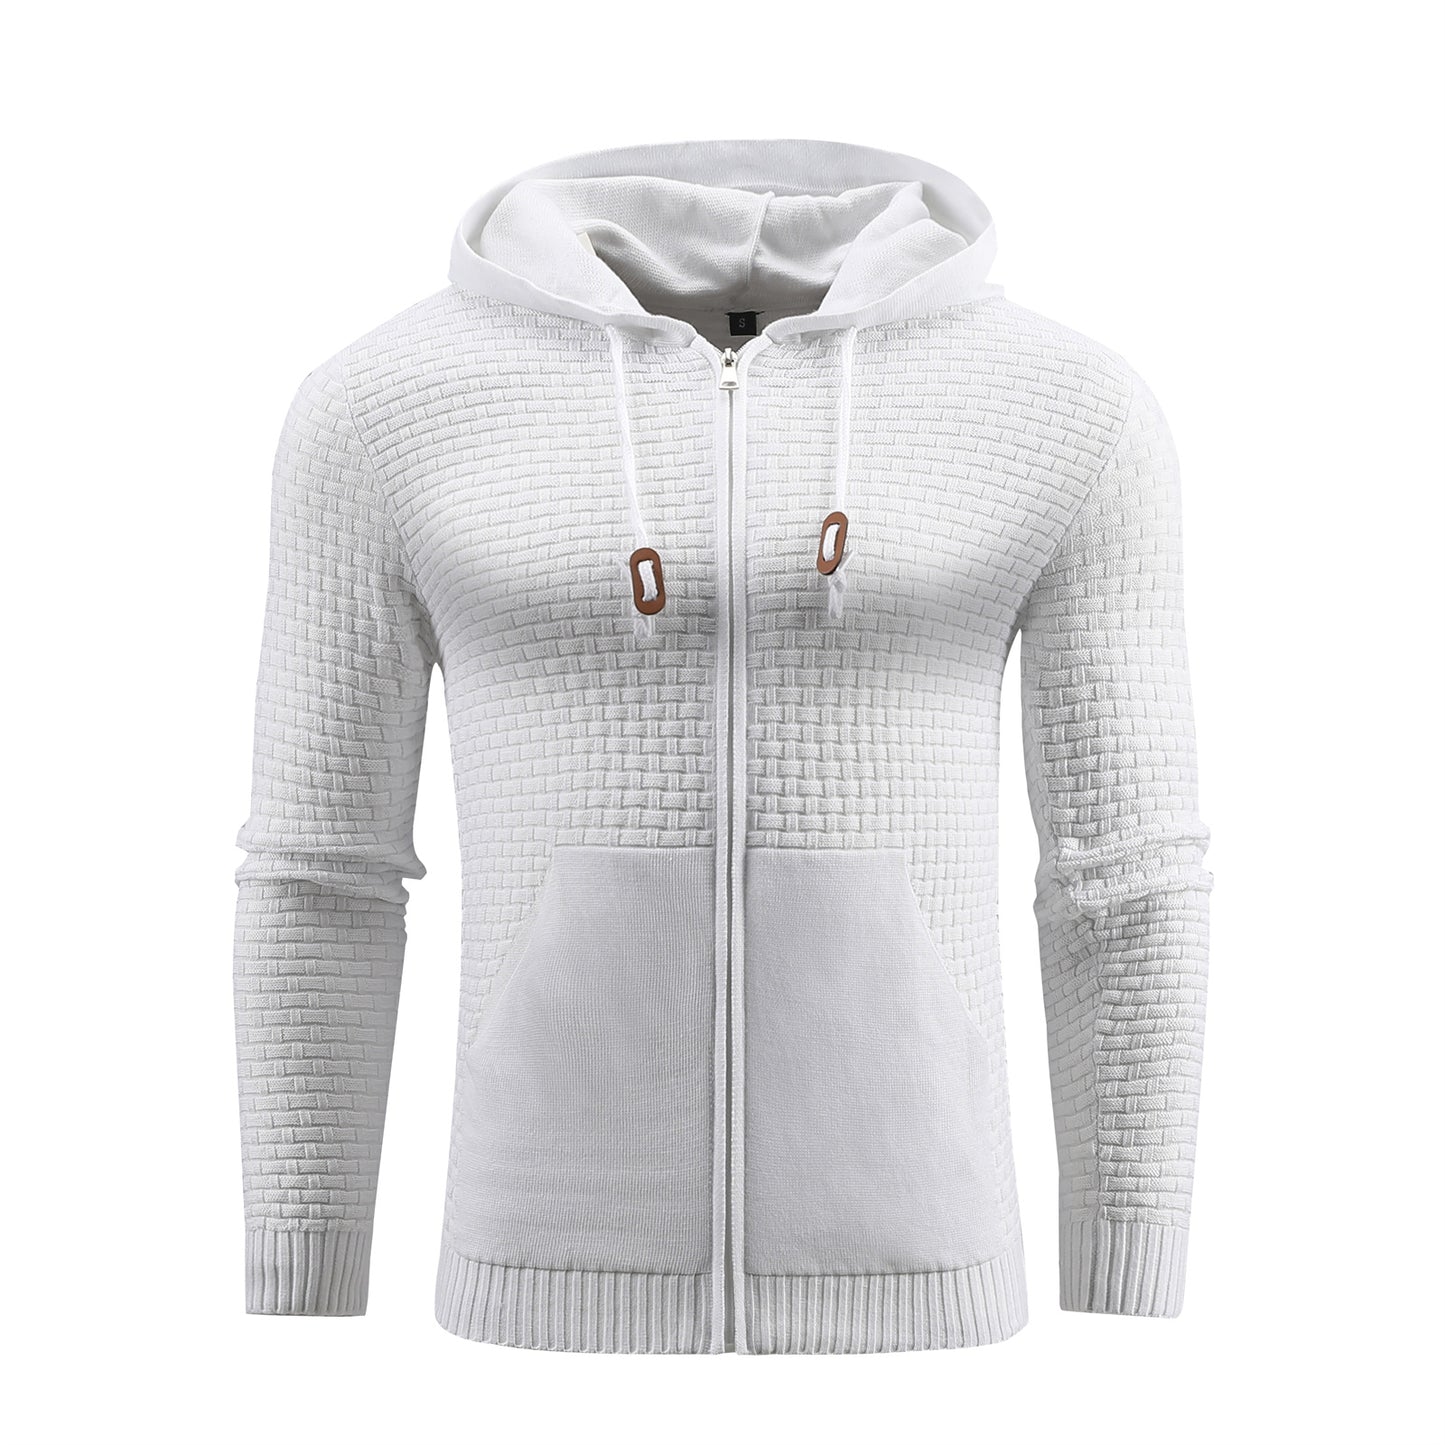 Zipper Hoodies Leather Sports Hoodies With Pockets